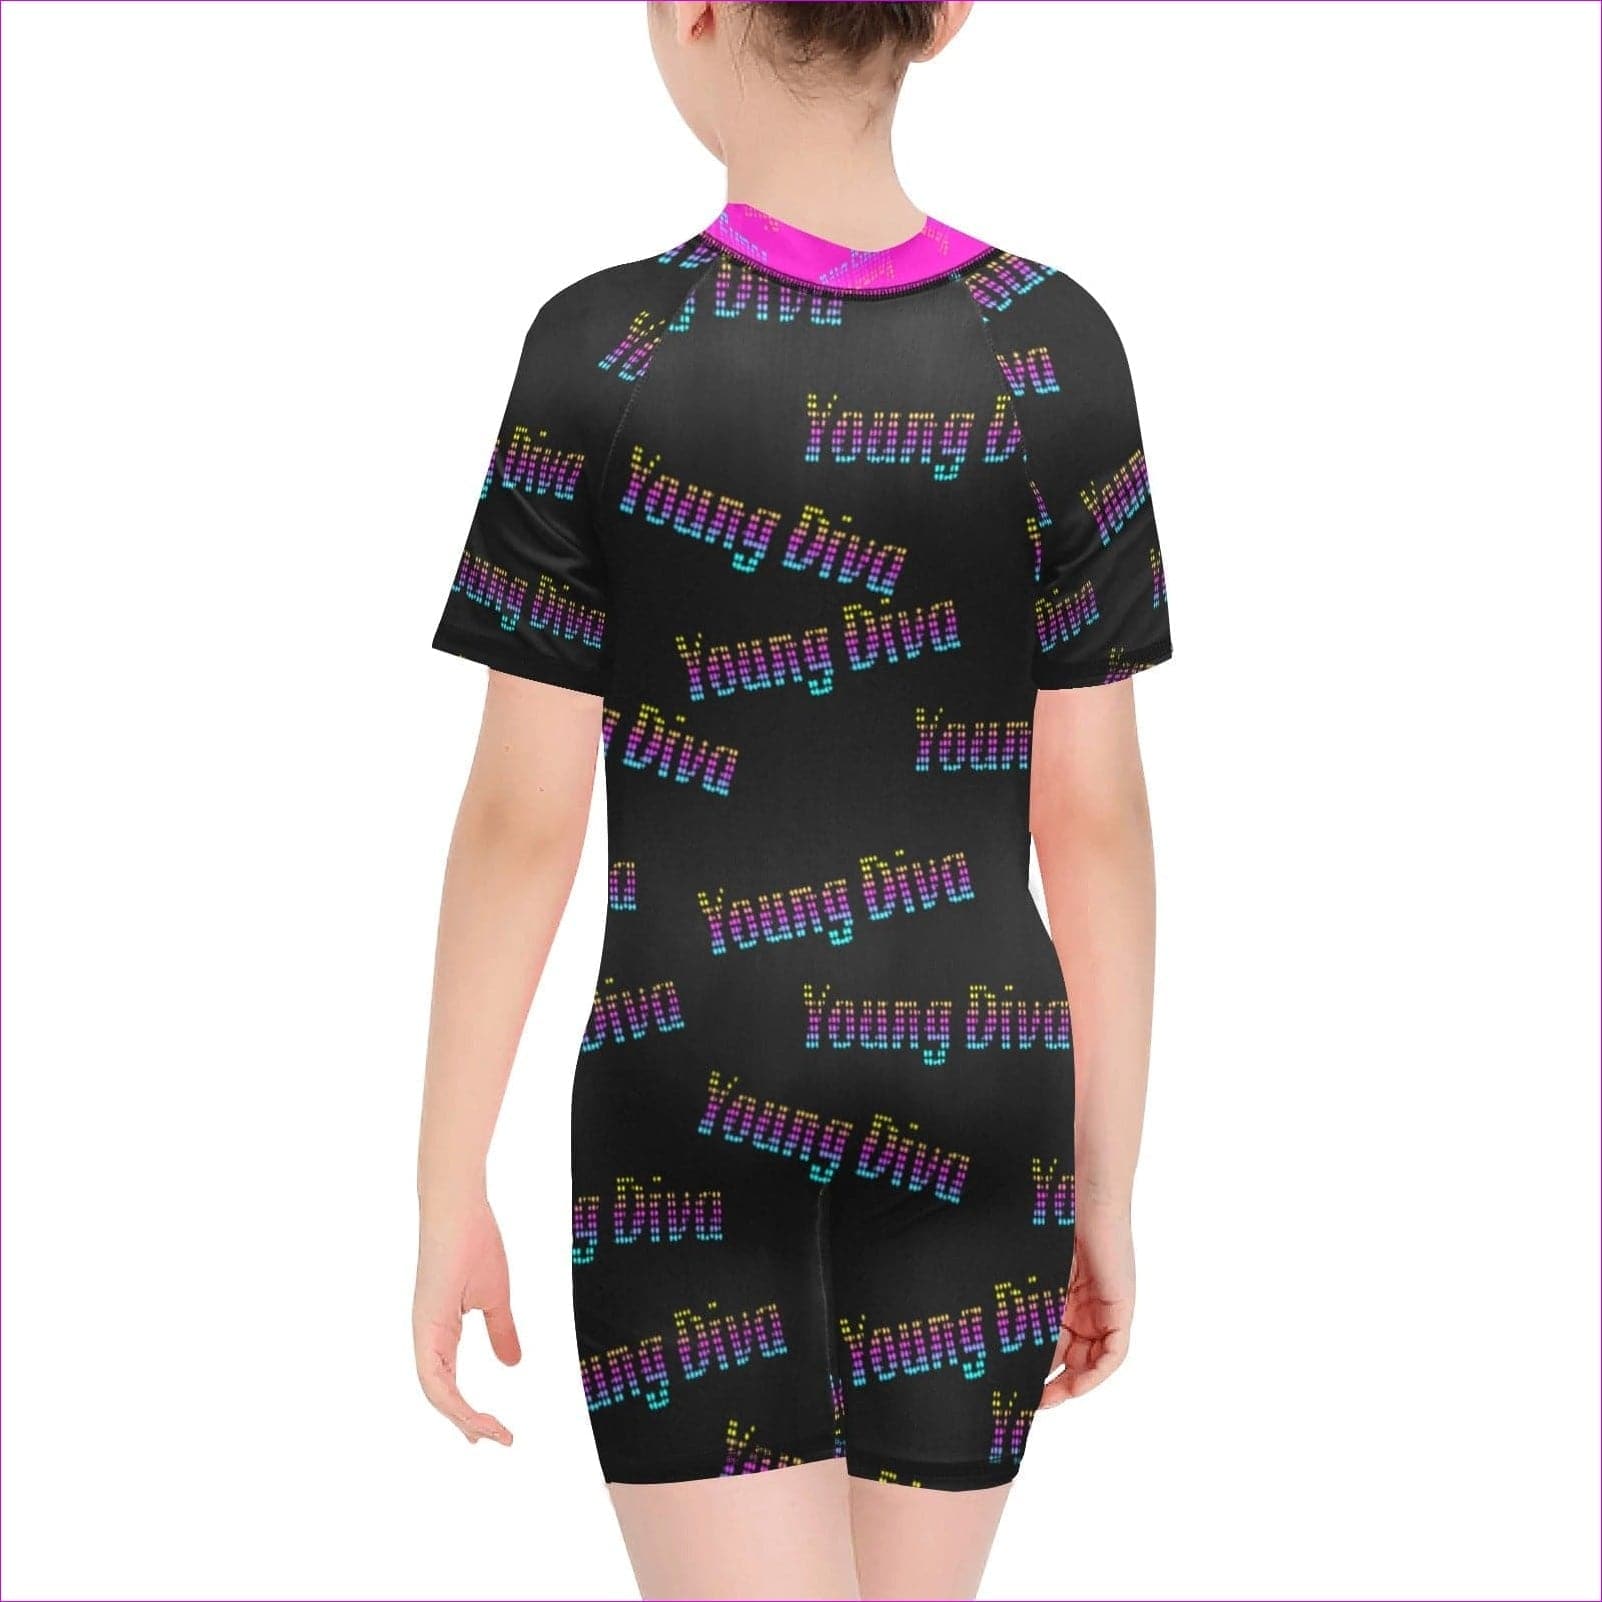 - Young Diva Kids Short Sleeve One-Piece Swimsuit - kids swimsuit at TFC&H Co.